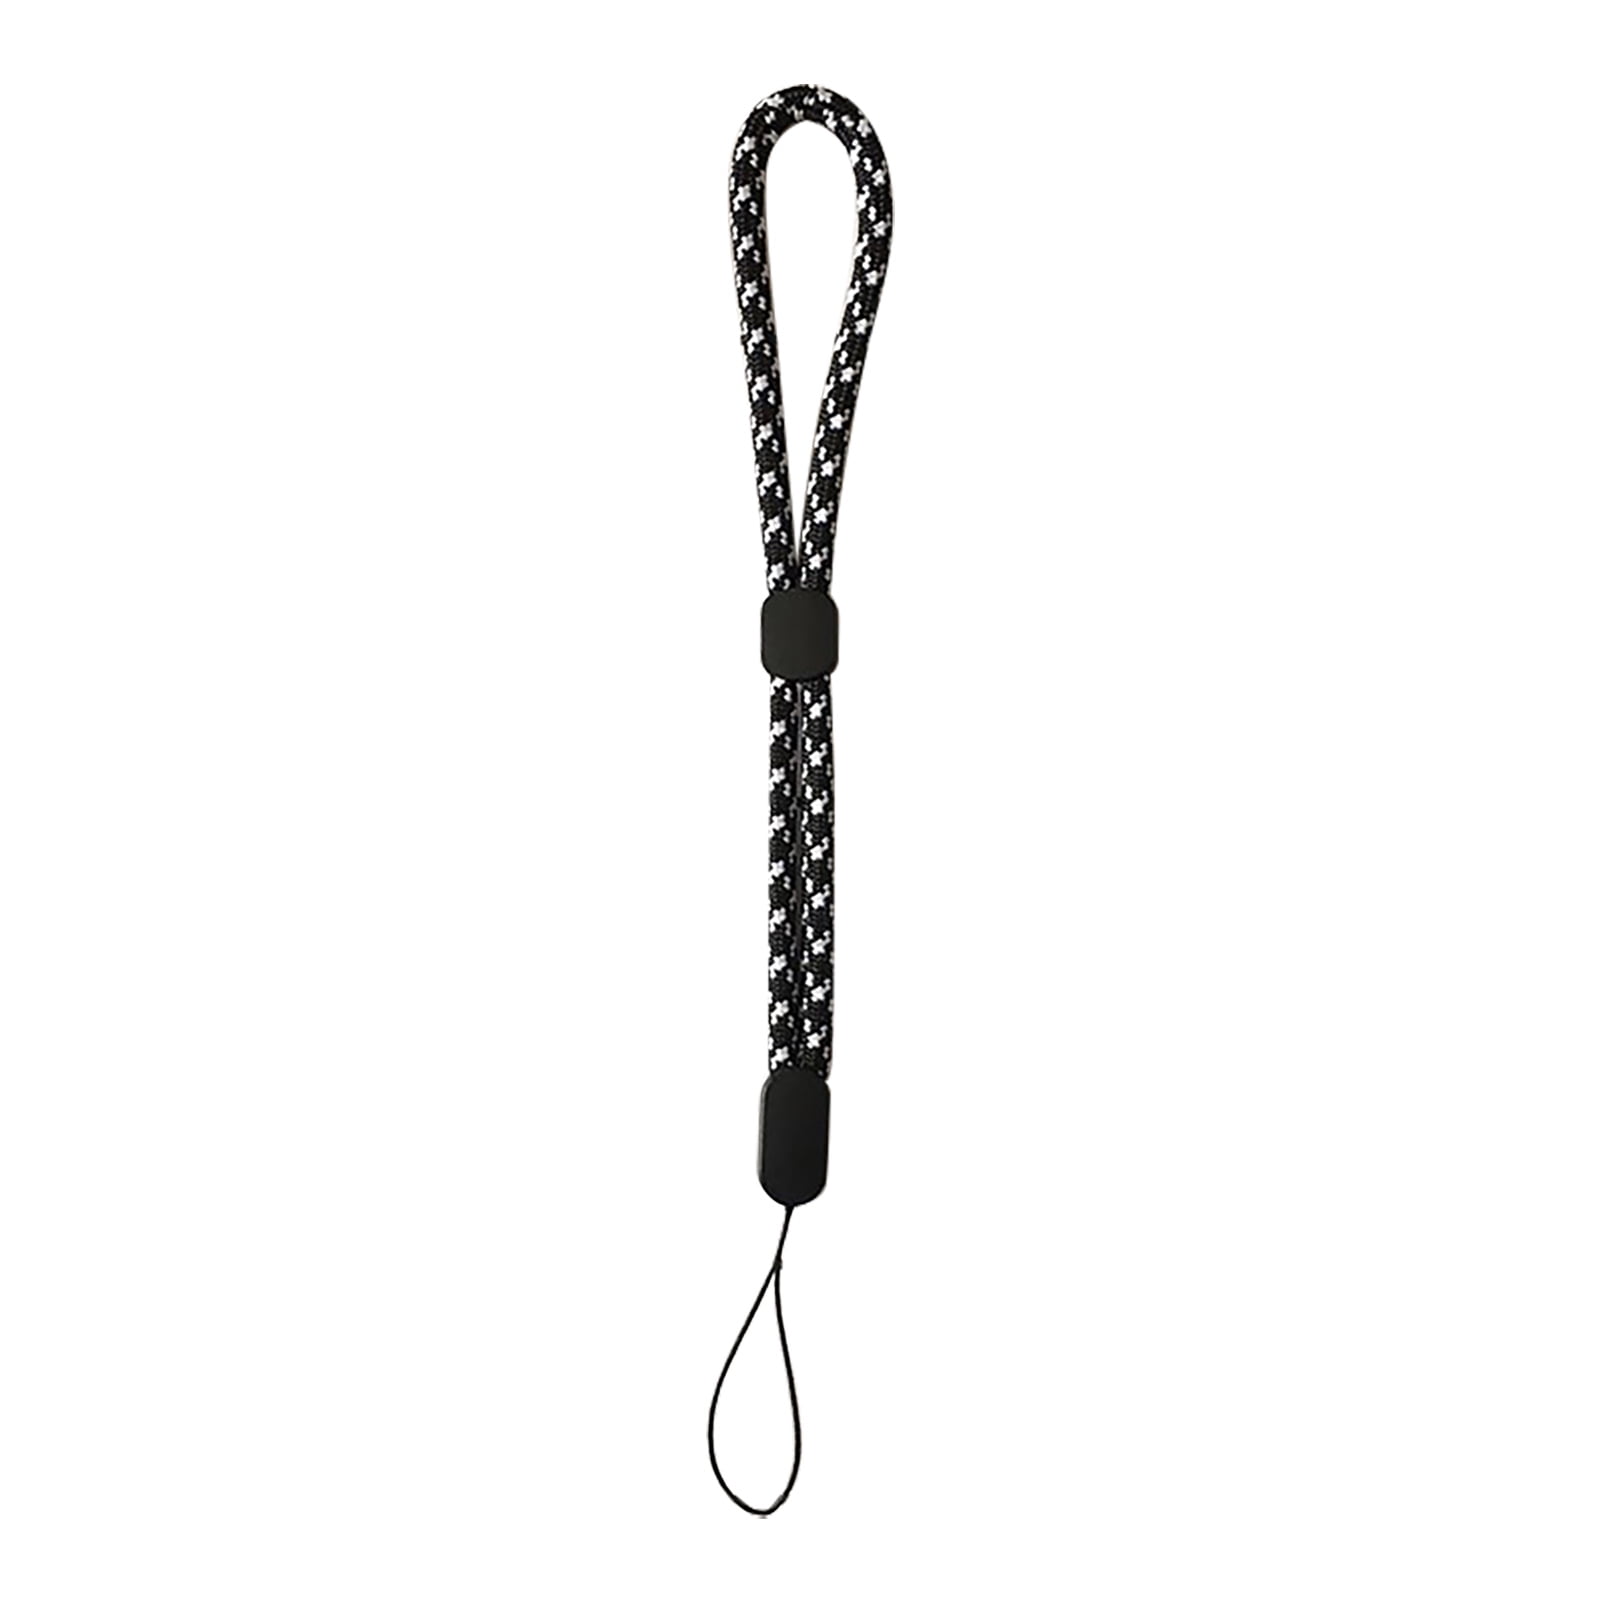 Welling Phone Strap Adjustable Anti-lost Non-fading Long and Short